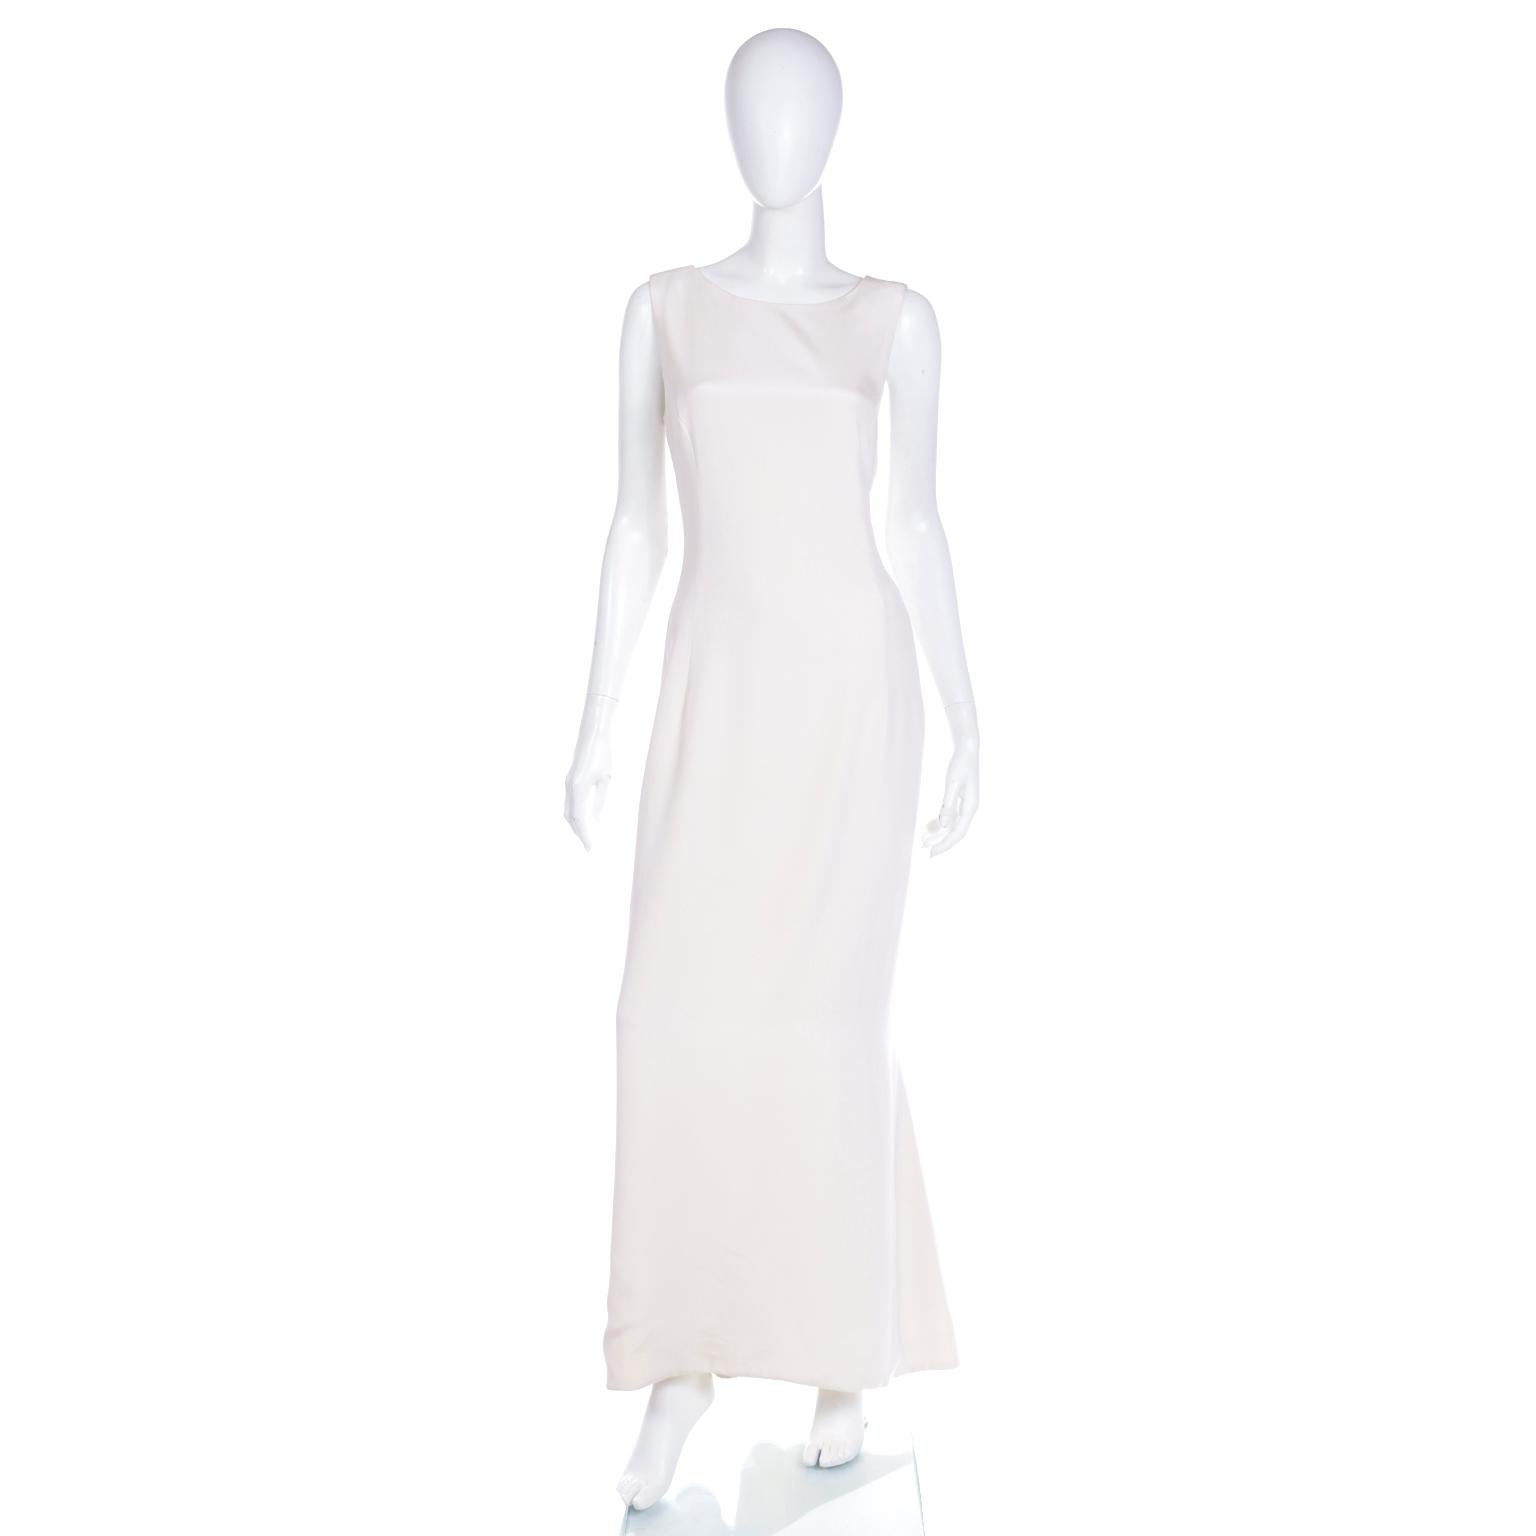 This exquisite evening gown is a testament to Carolina Herrera's timeless elegance. This lovely ivory silk crepe evening dress is ultra refined and sophisticated. The flattering silhouette is a loose mermaid style with a flared, more fluid lower